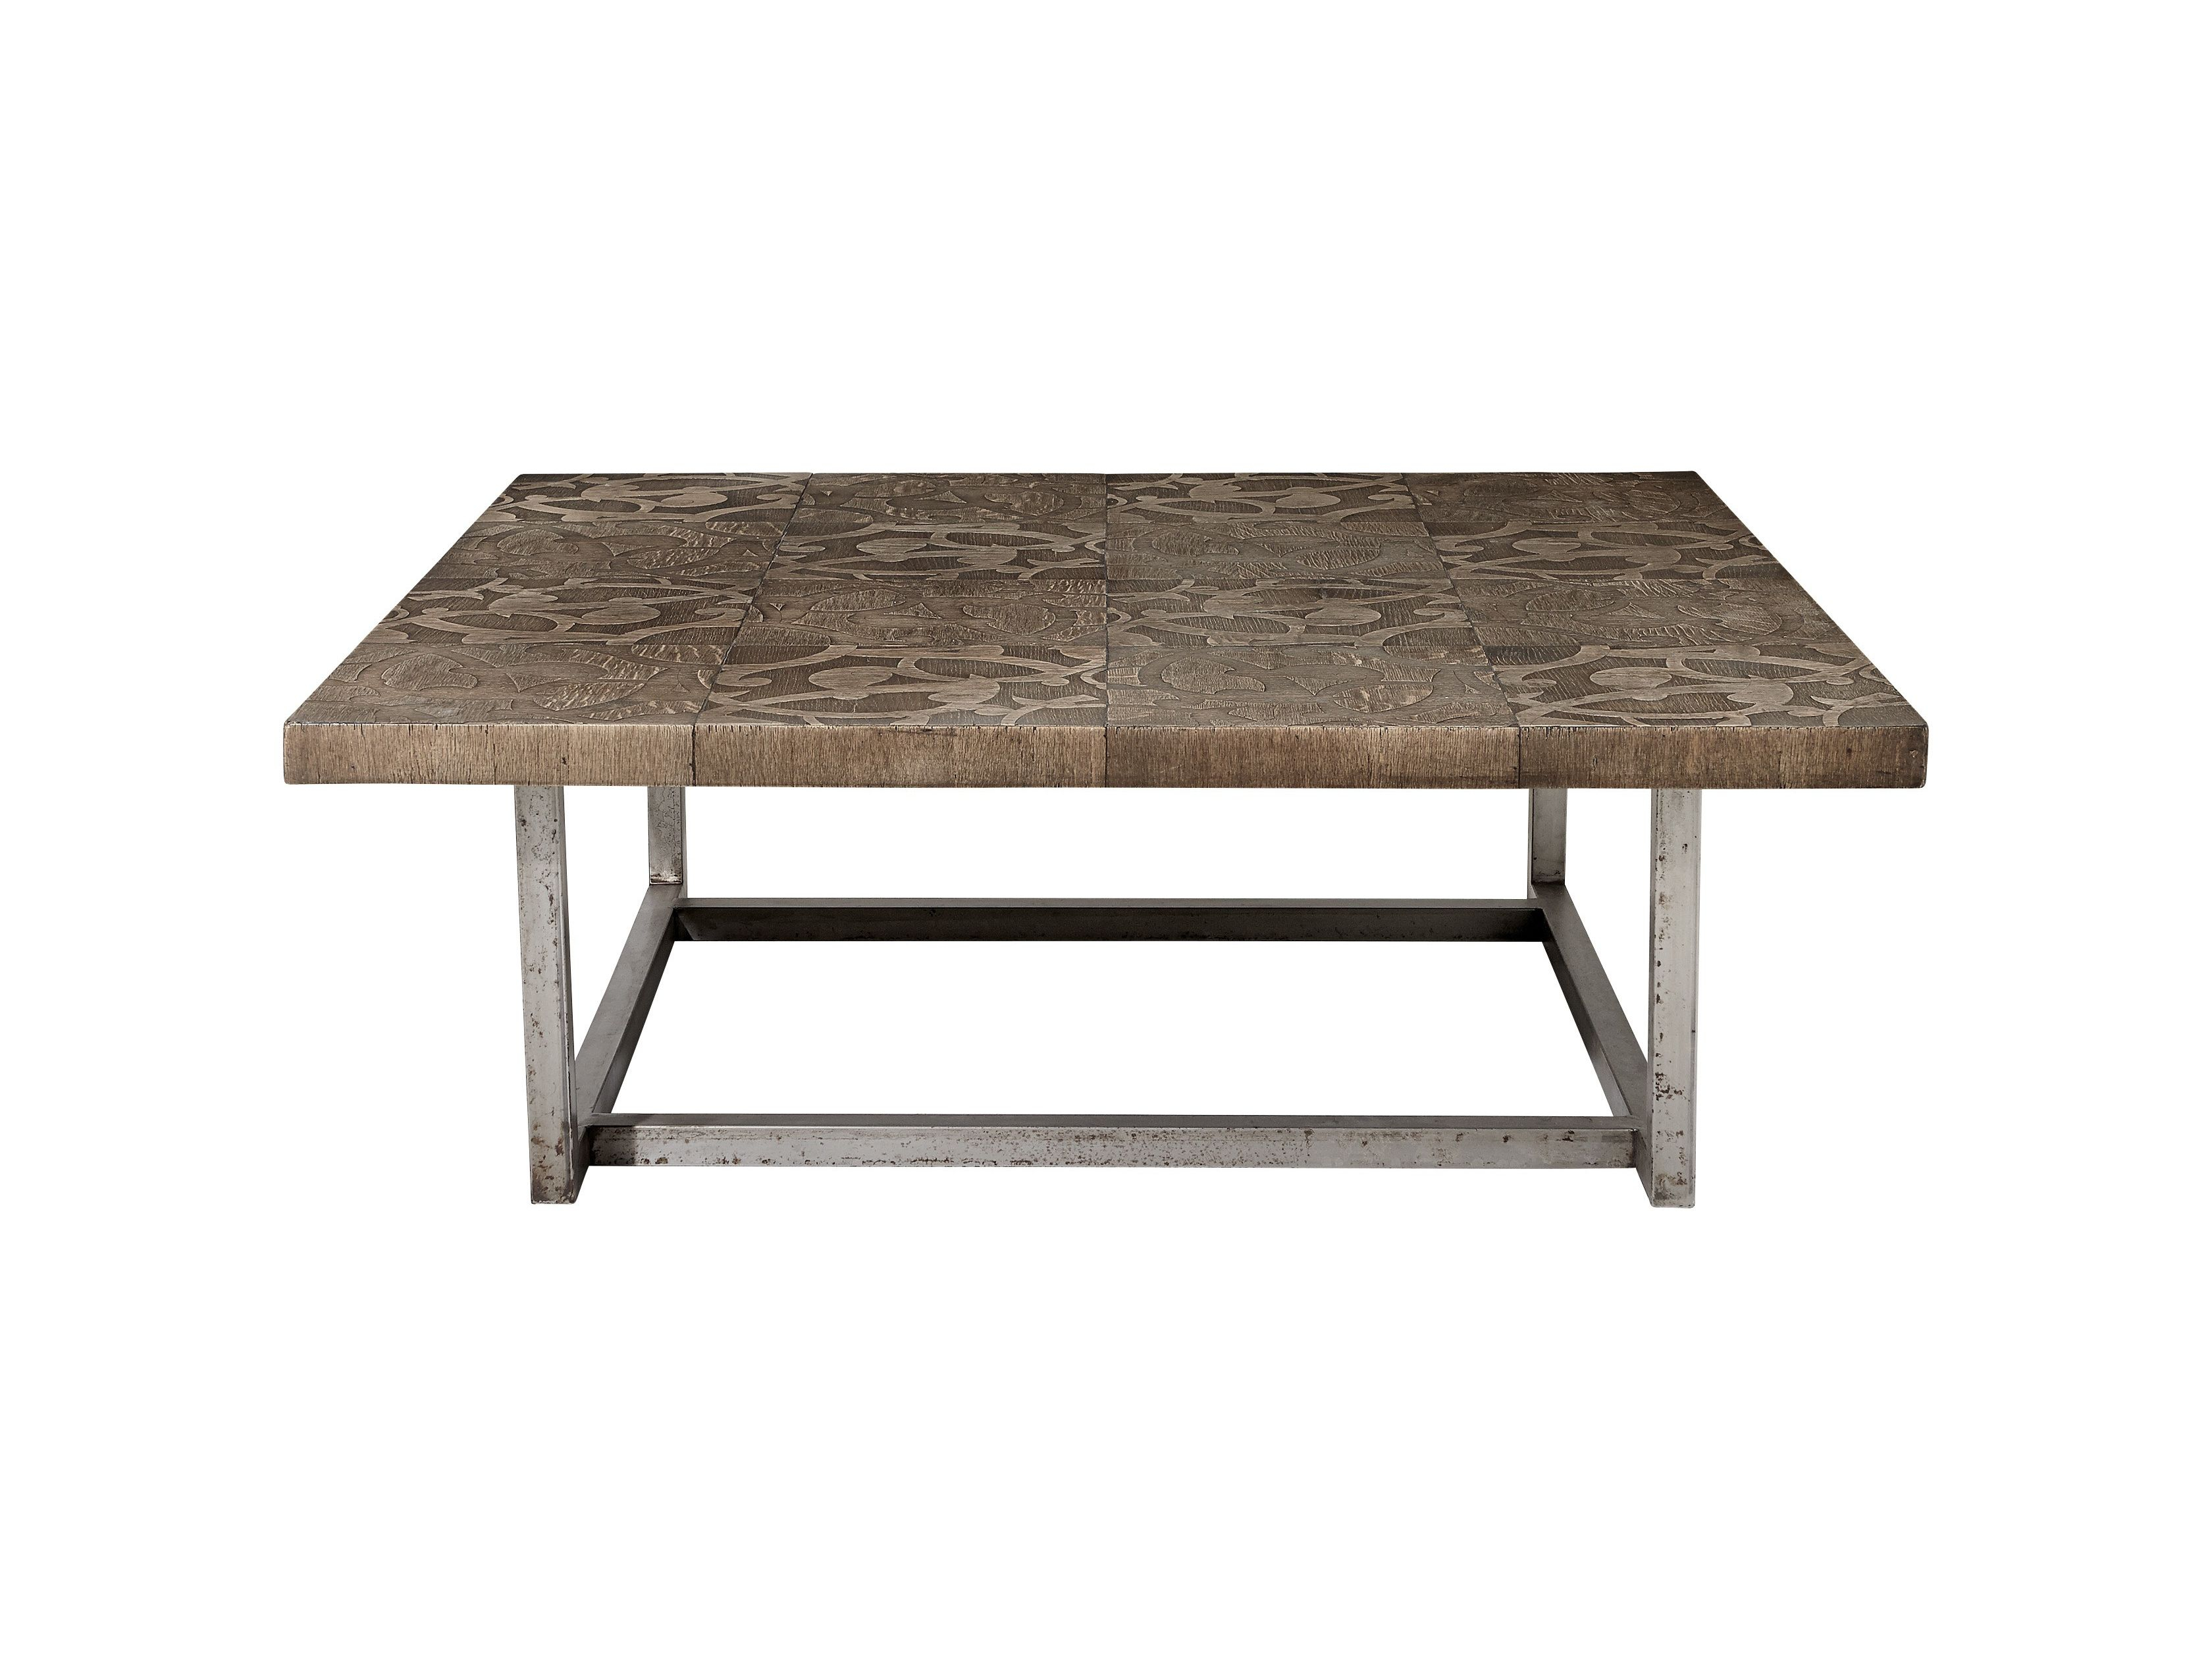 Marbella Coffee Table Arhaus Furniture Hickok Living Room throughout proportions 3360 X 2522